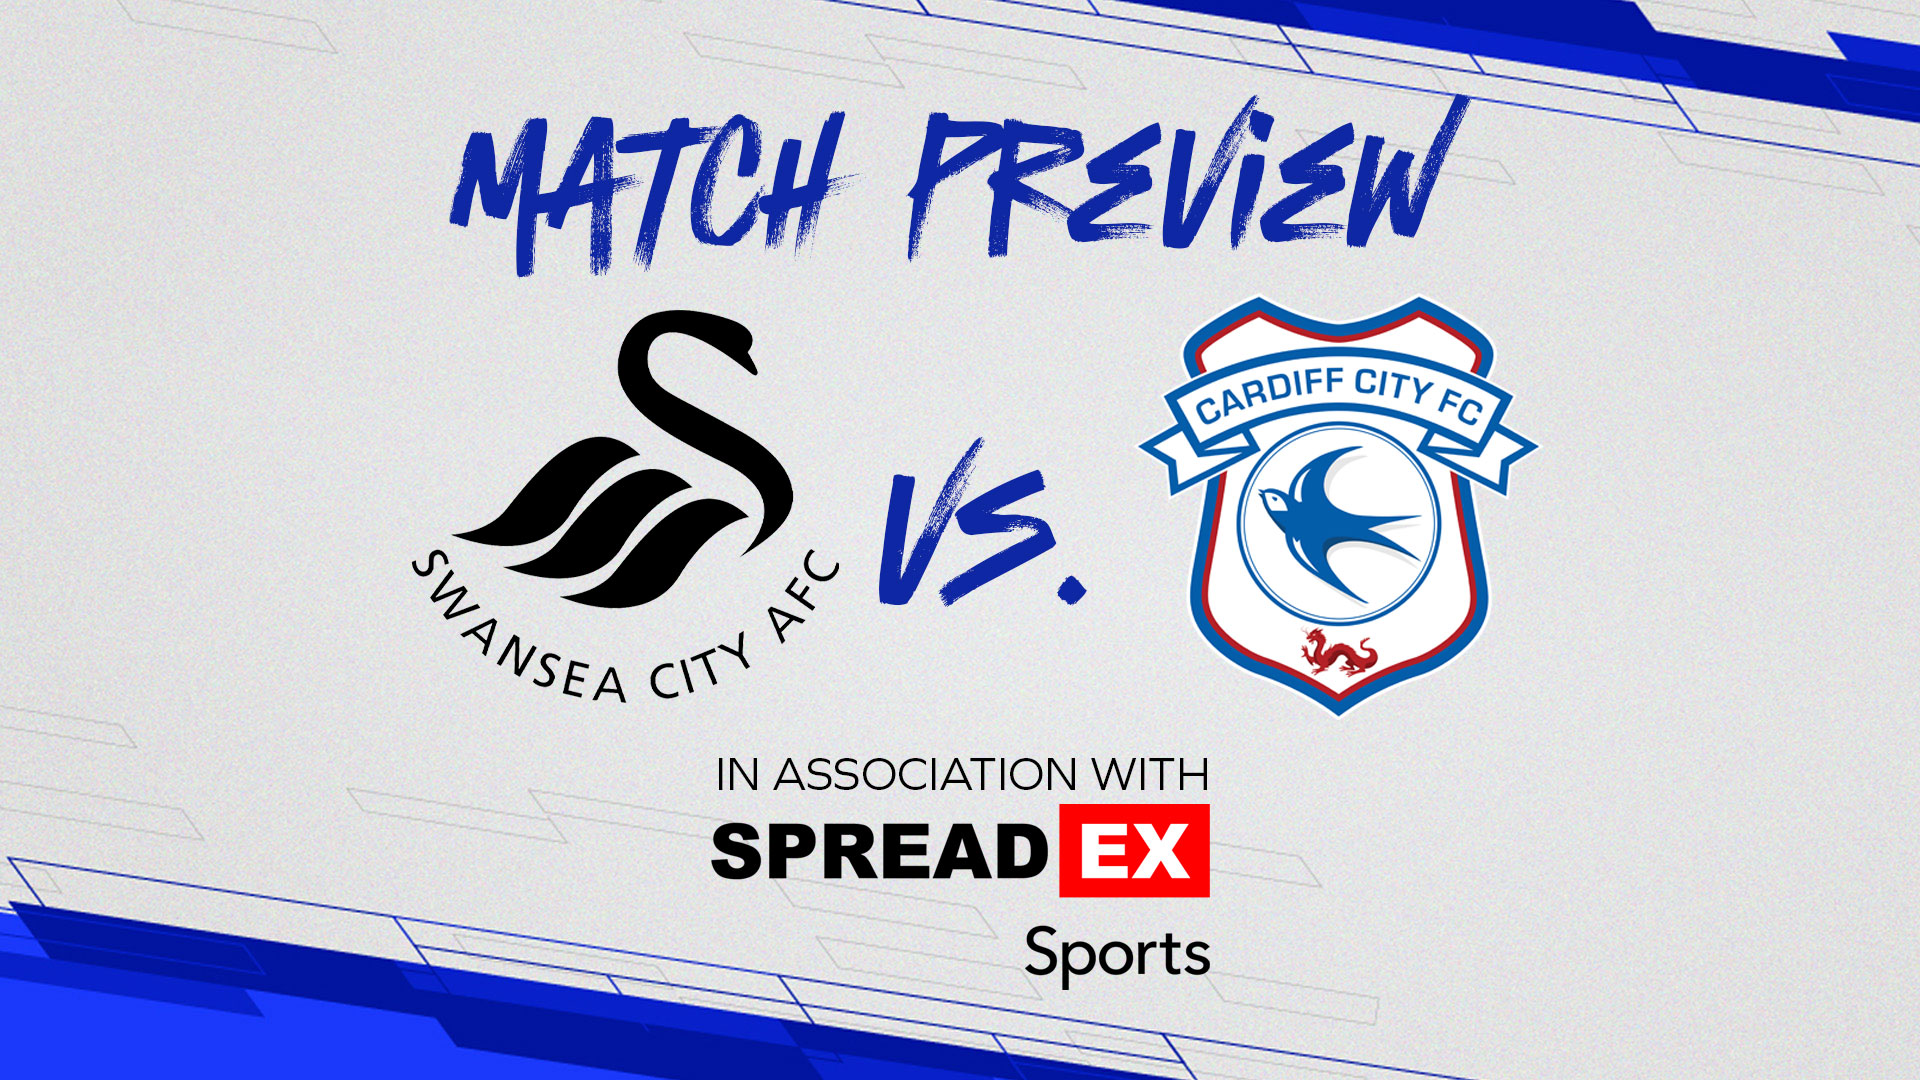 Match Preview: Swansea City vs. Cardiff City